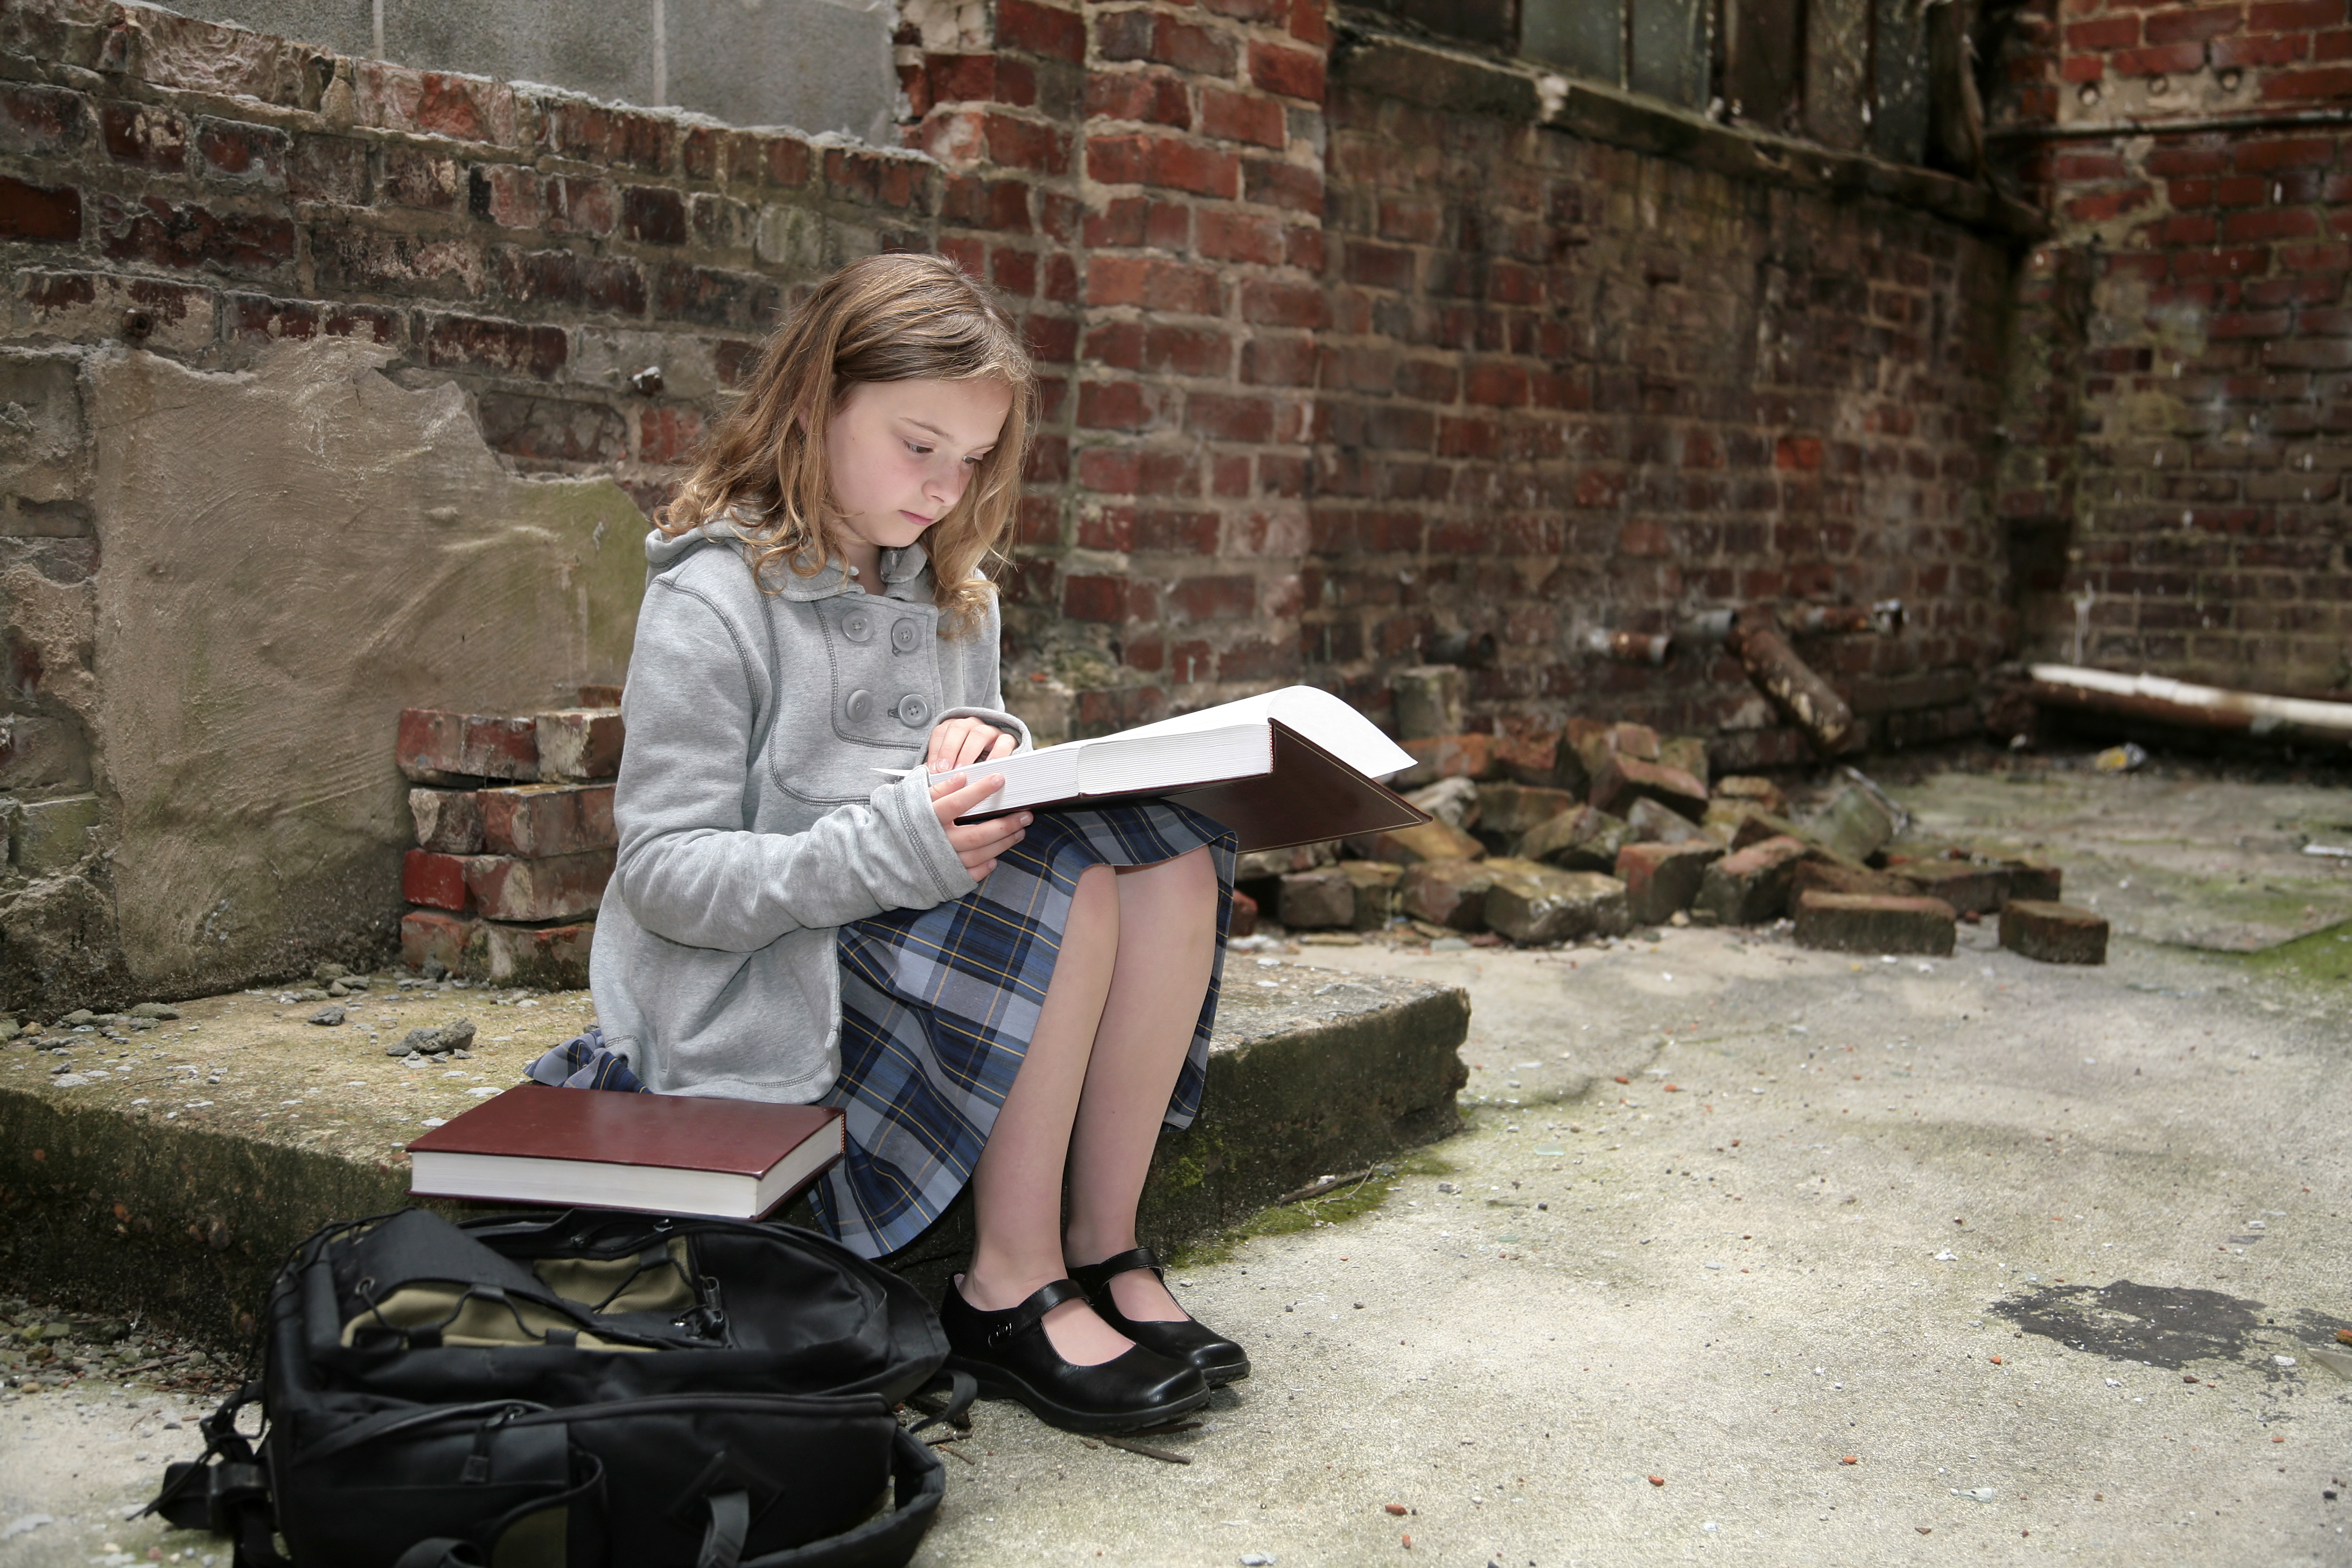 Girl is studying in abandoned building | Source: Shutterstock